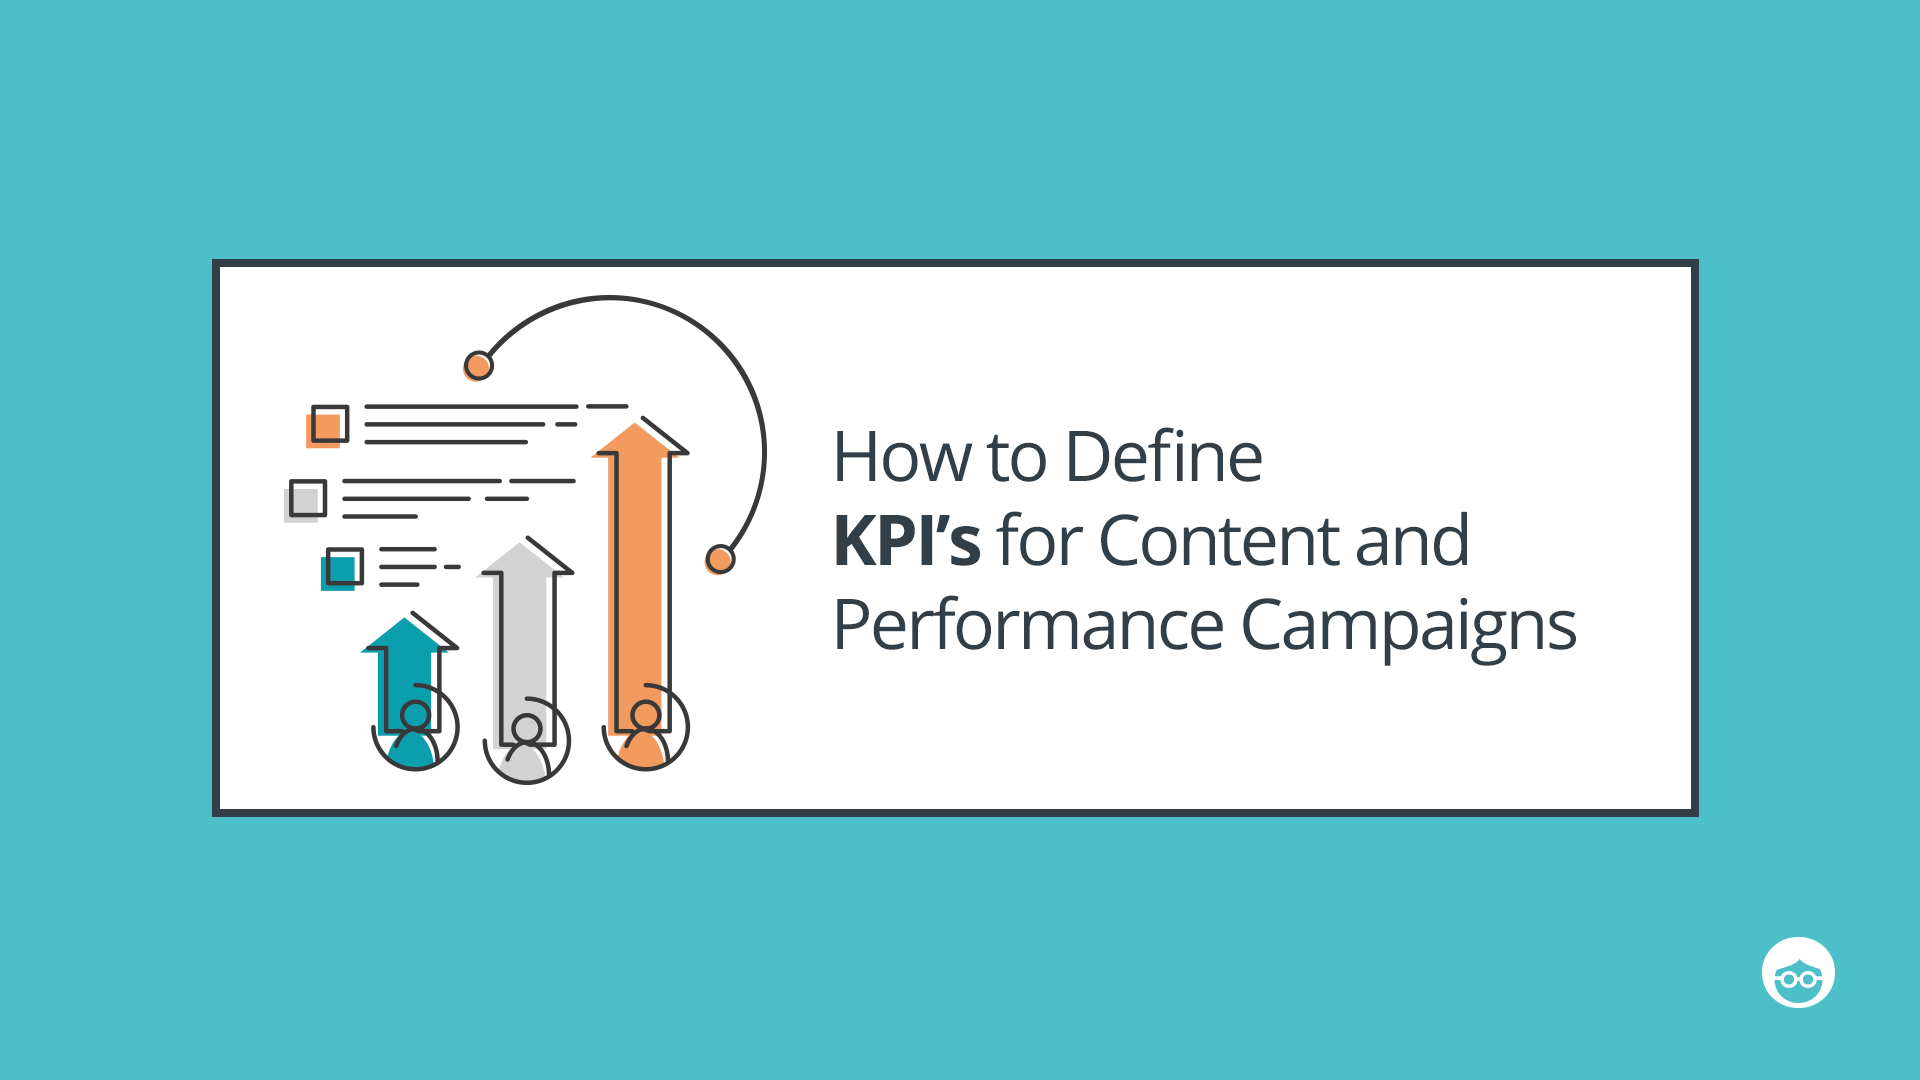 4 Ideas to Consider When Setting Your Campaign KPIs